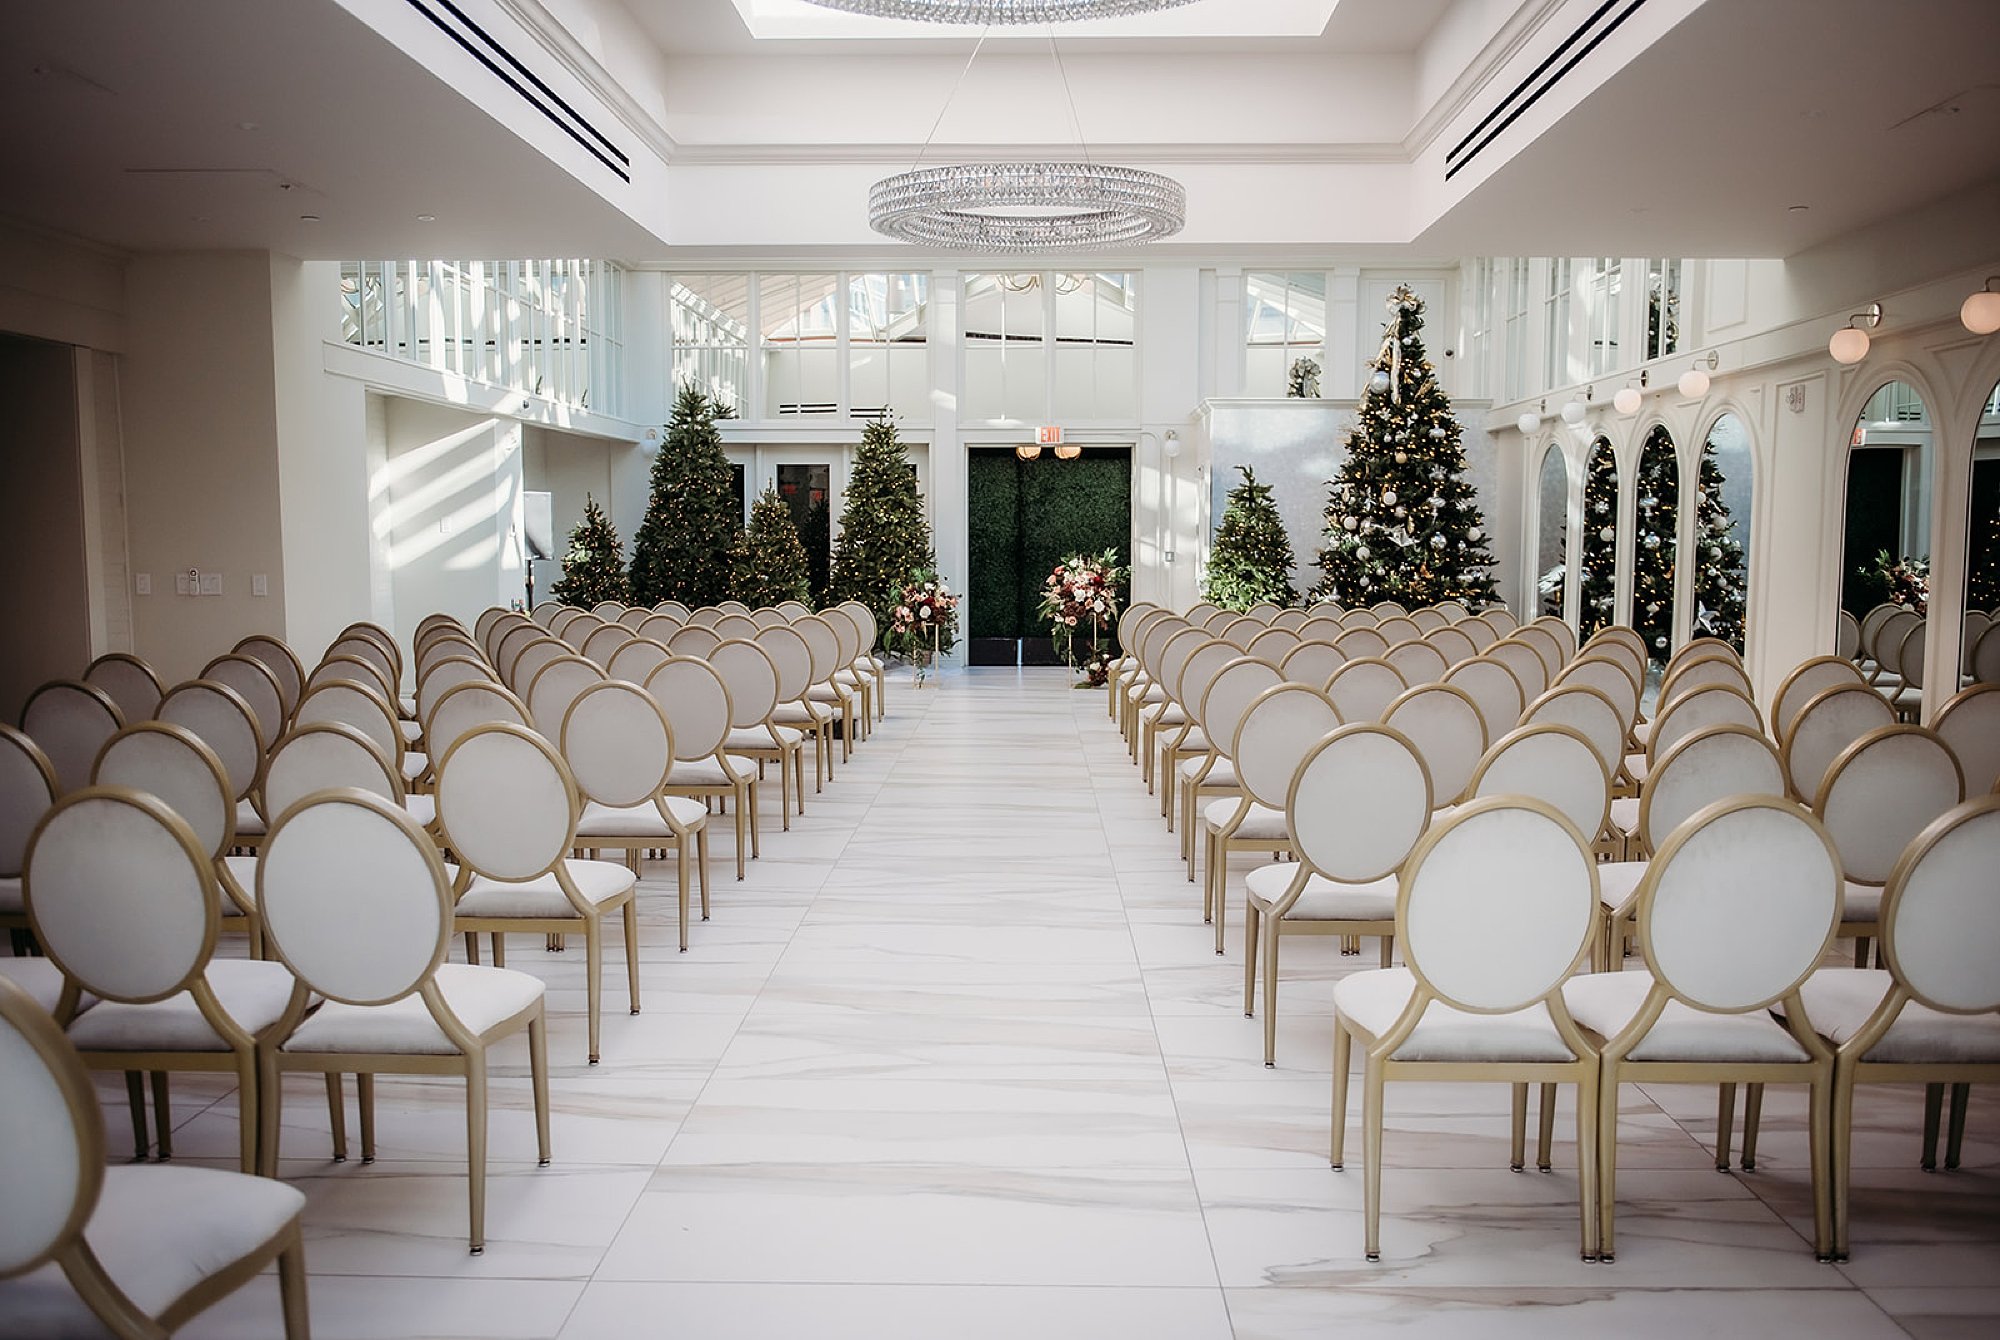 ceremony site with Christmas trees inside The Adelphi Hotel